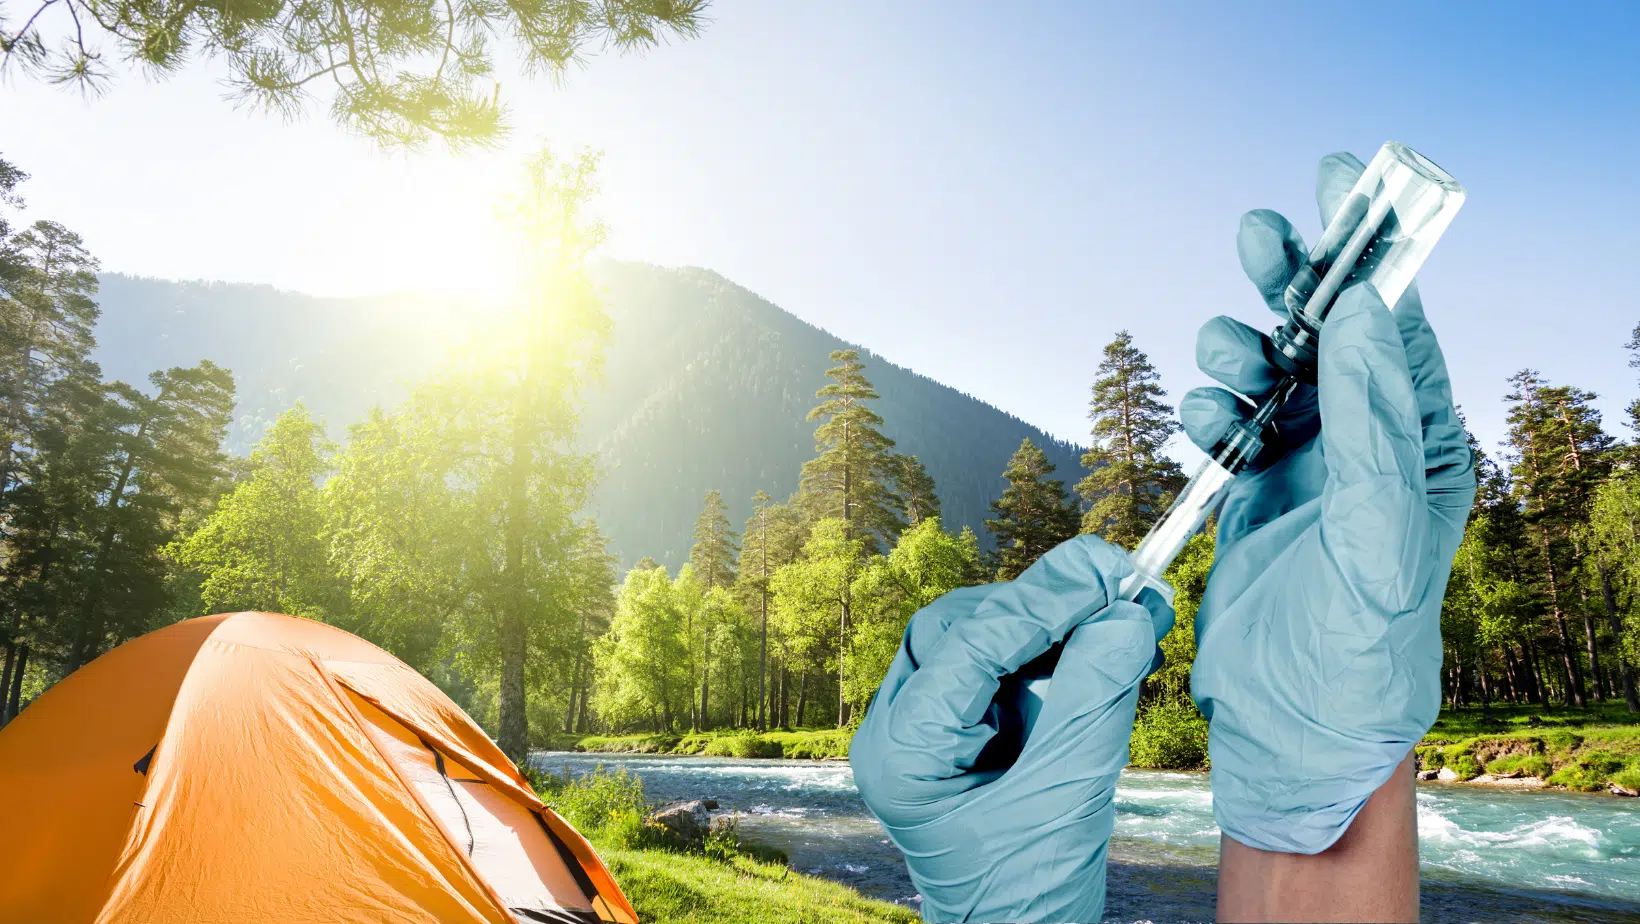 More Campground Vaccine Clinics Are On The Way!